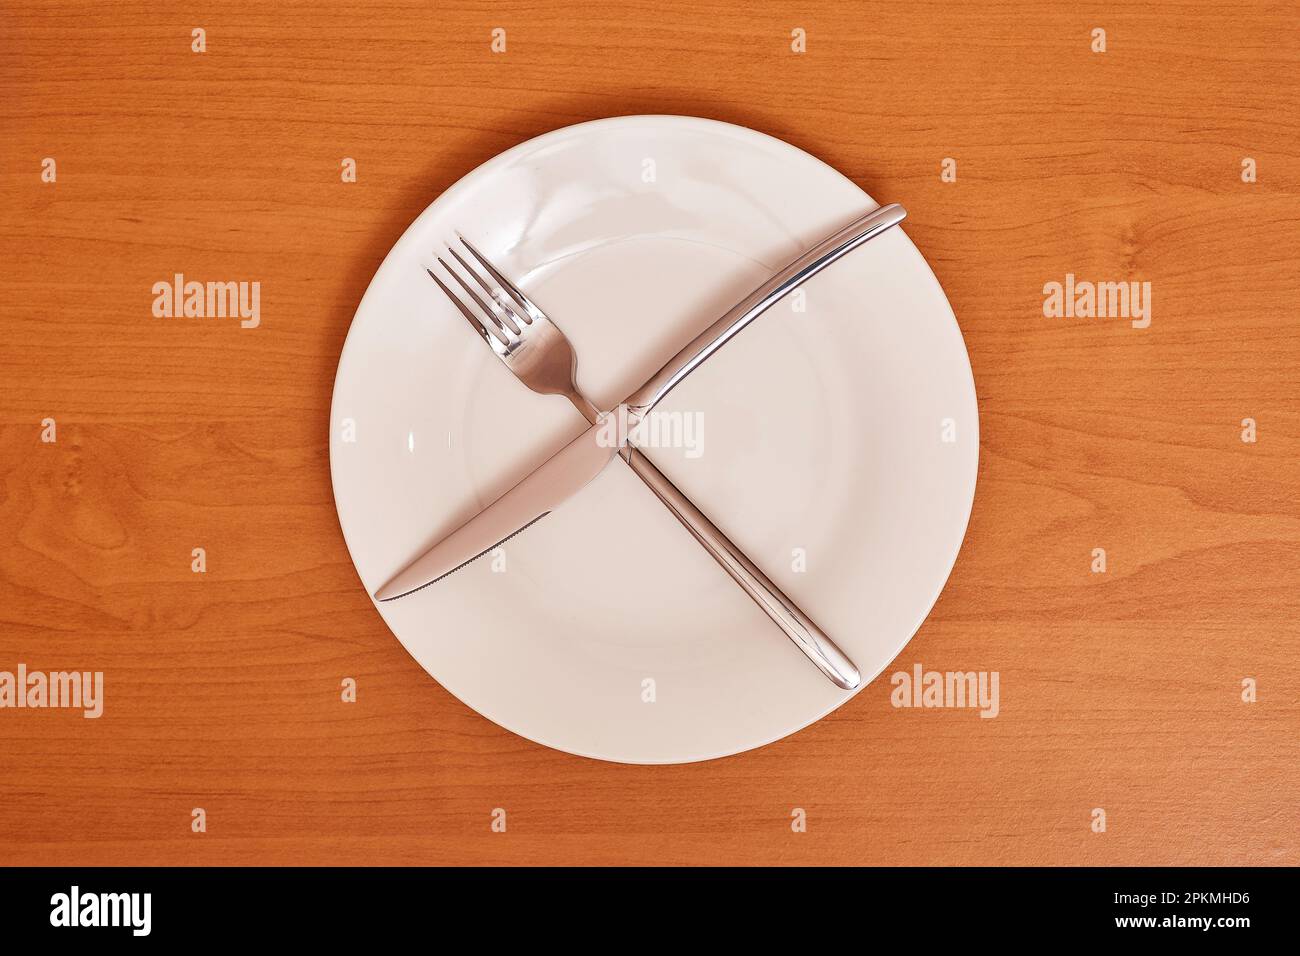 A signal 'Meal break'. Empty and clean blue plate with fork and knife on a wooden table as an example of table etiquette Stock Photo